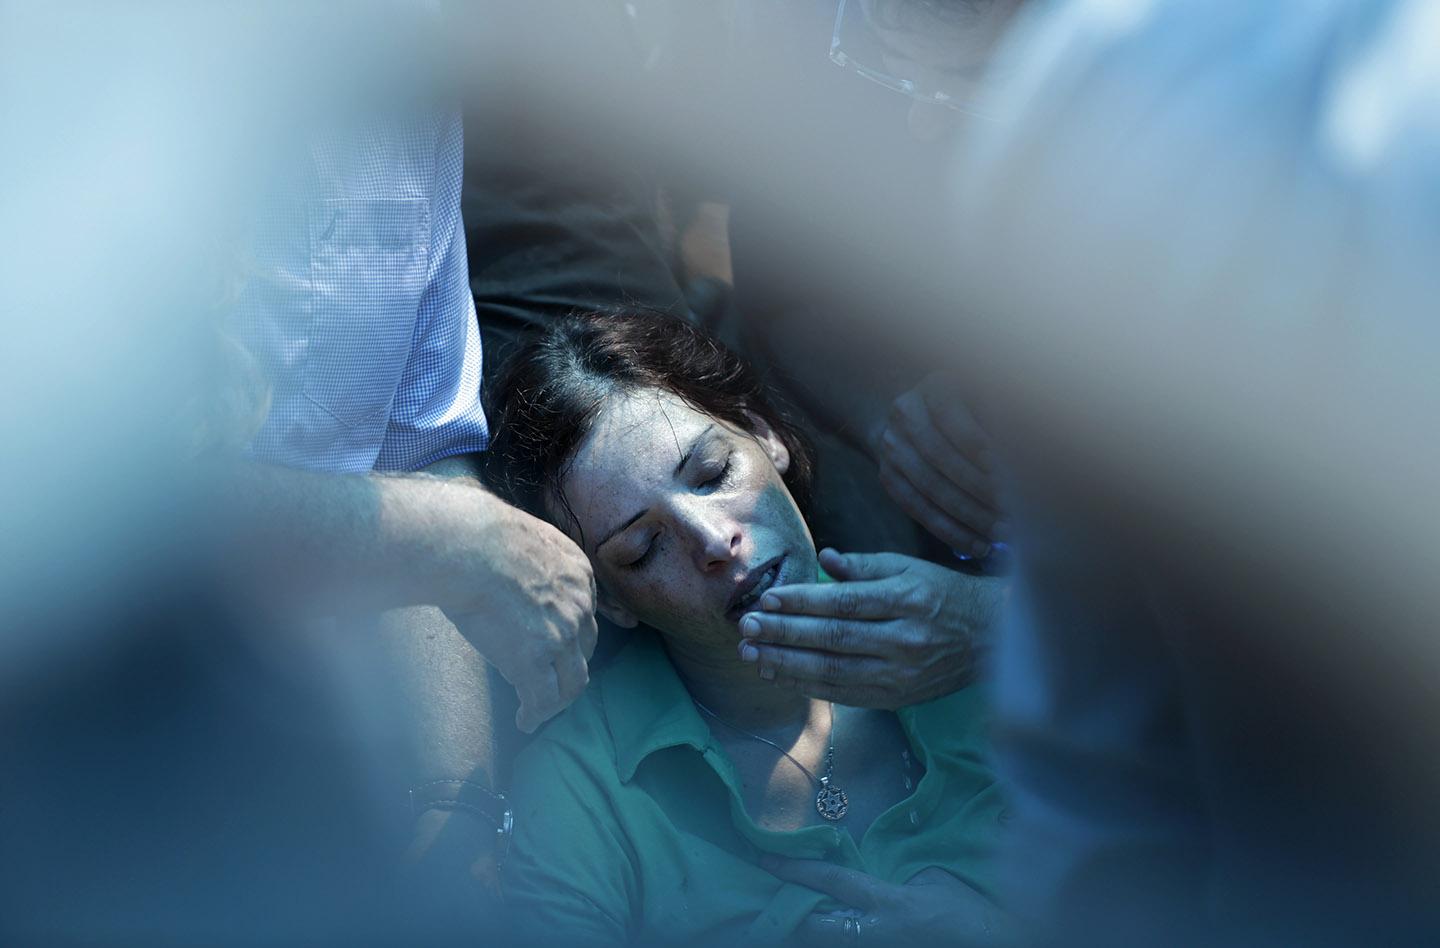 Dana, the sister of Israeli soldier Tsafrir Bar-Or, mourns during his funeral.